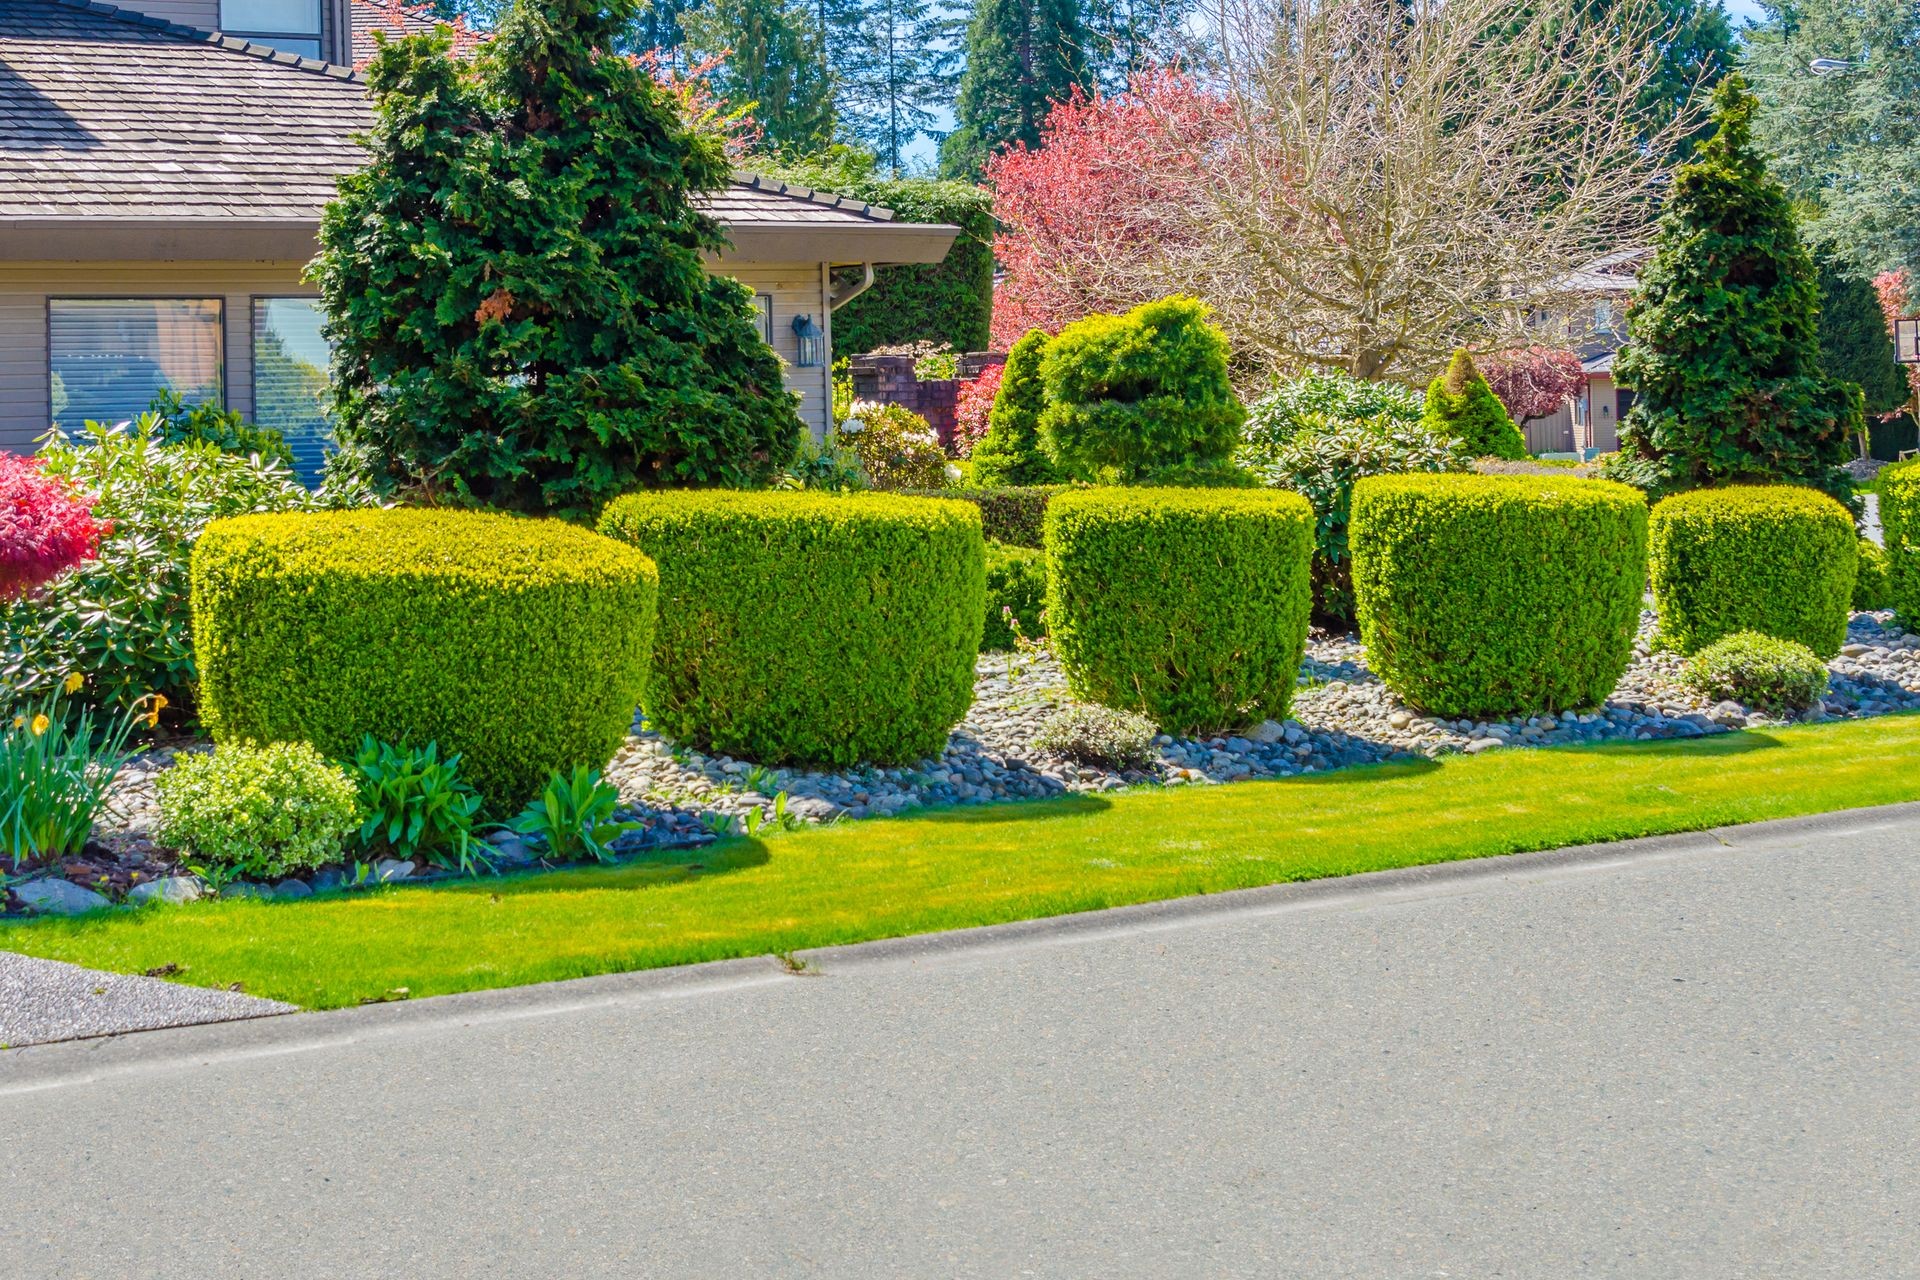 Nicely trimmed bushes and stones in front of the house, front yard. Landscape design.